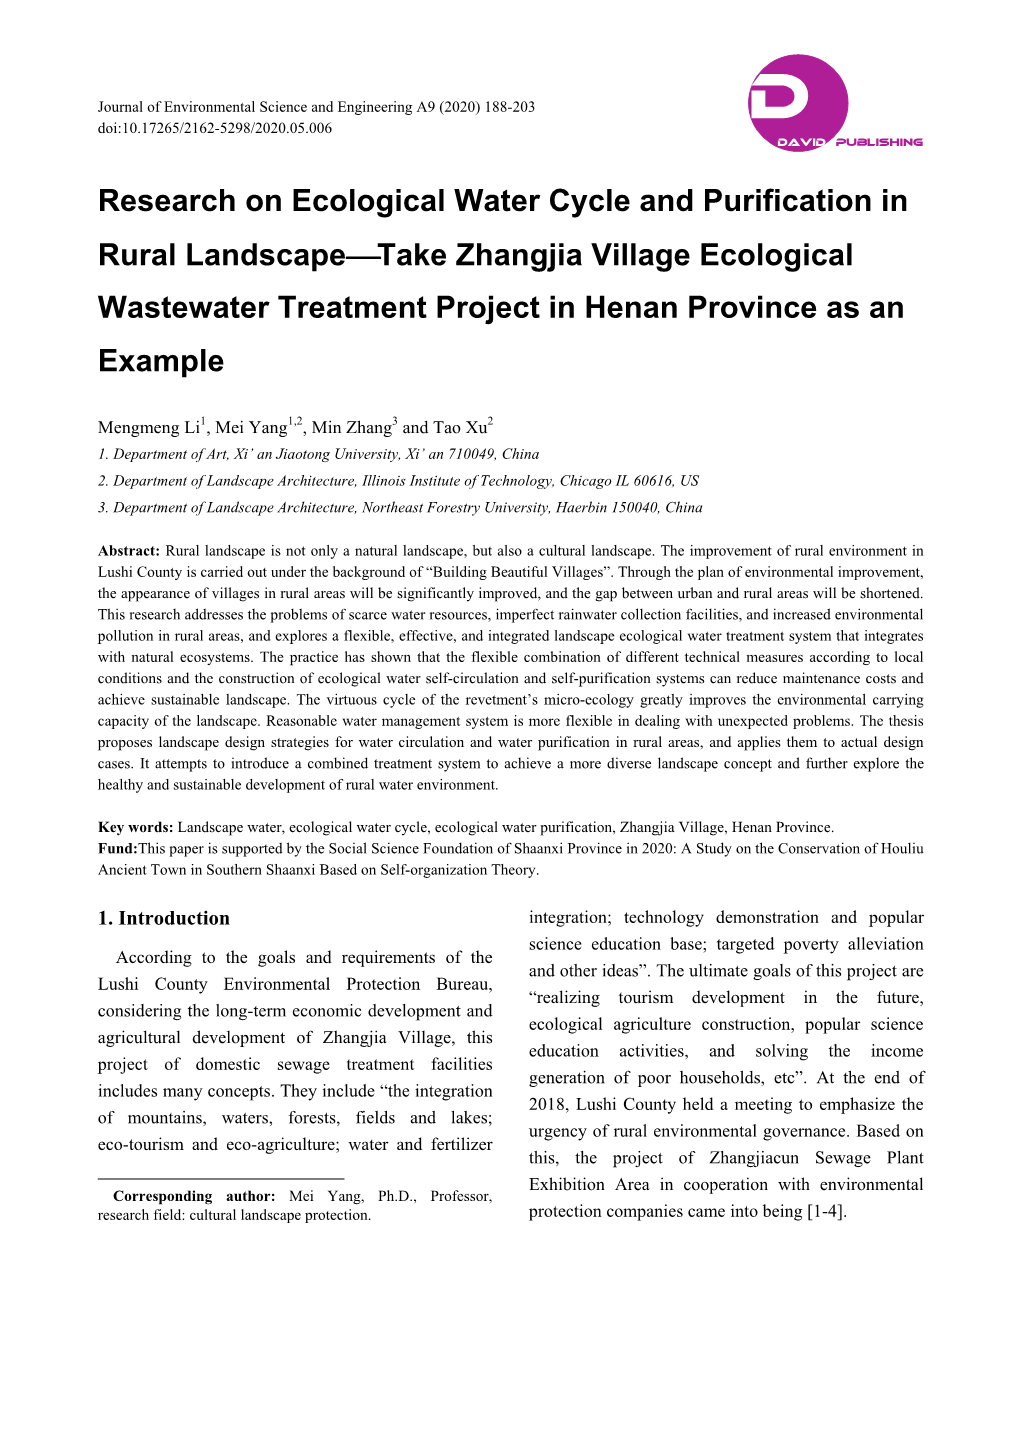 Research on Ecological Water Cycle and Purification in Rural Landscapetake Zhangjia Village Ecological Wastewater Treatment Project in Henan Province As an Example